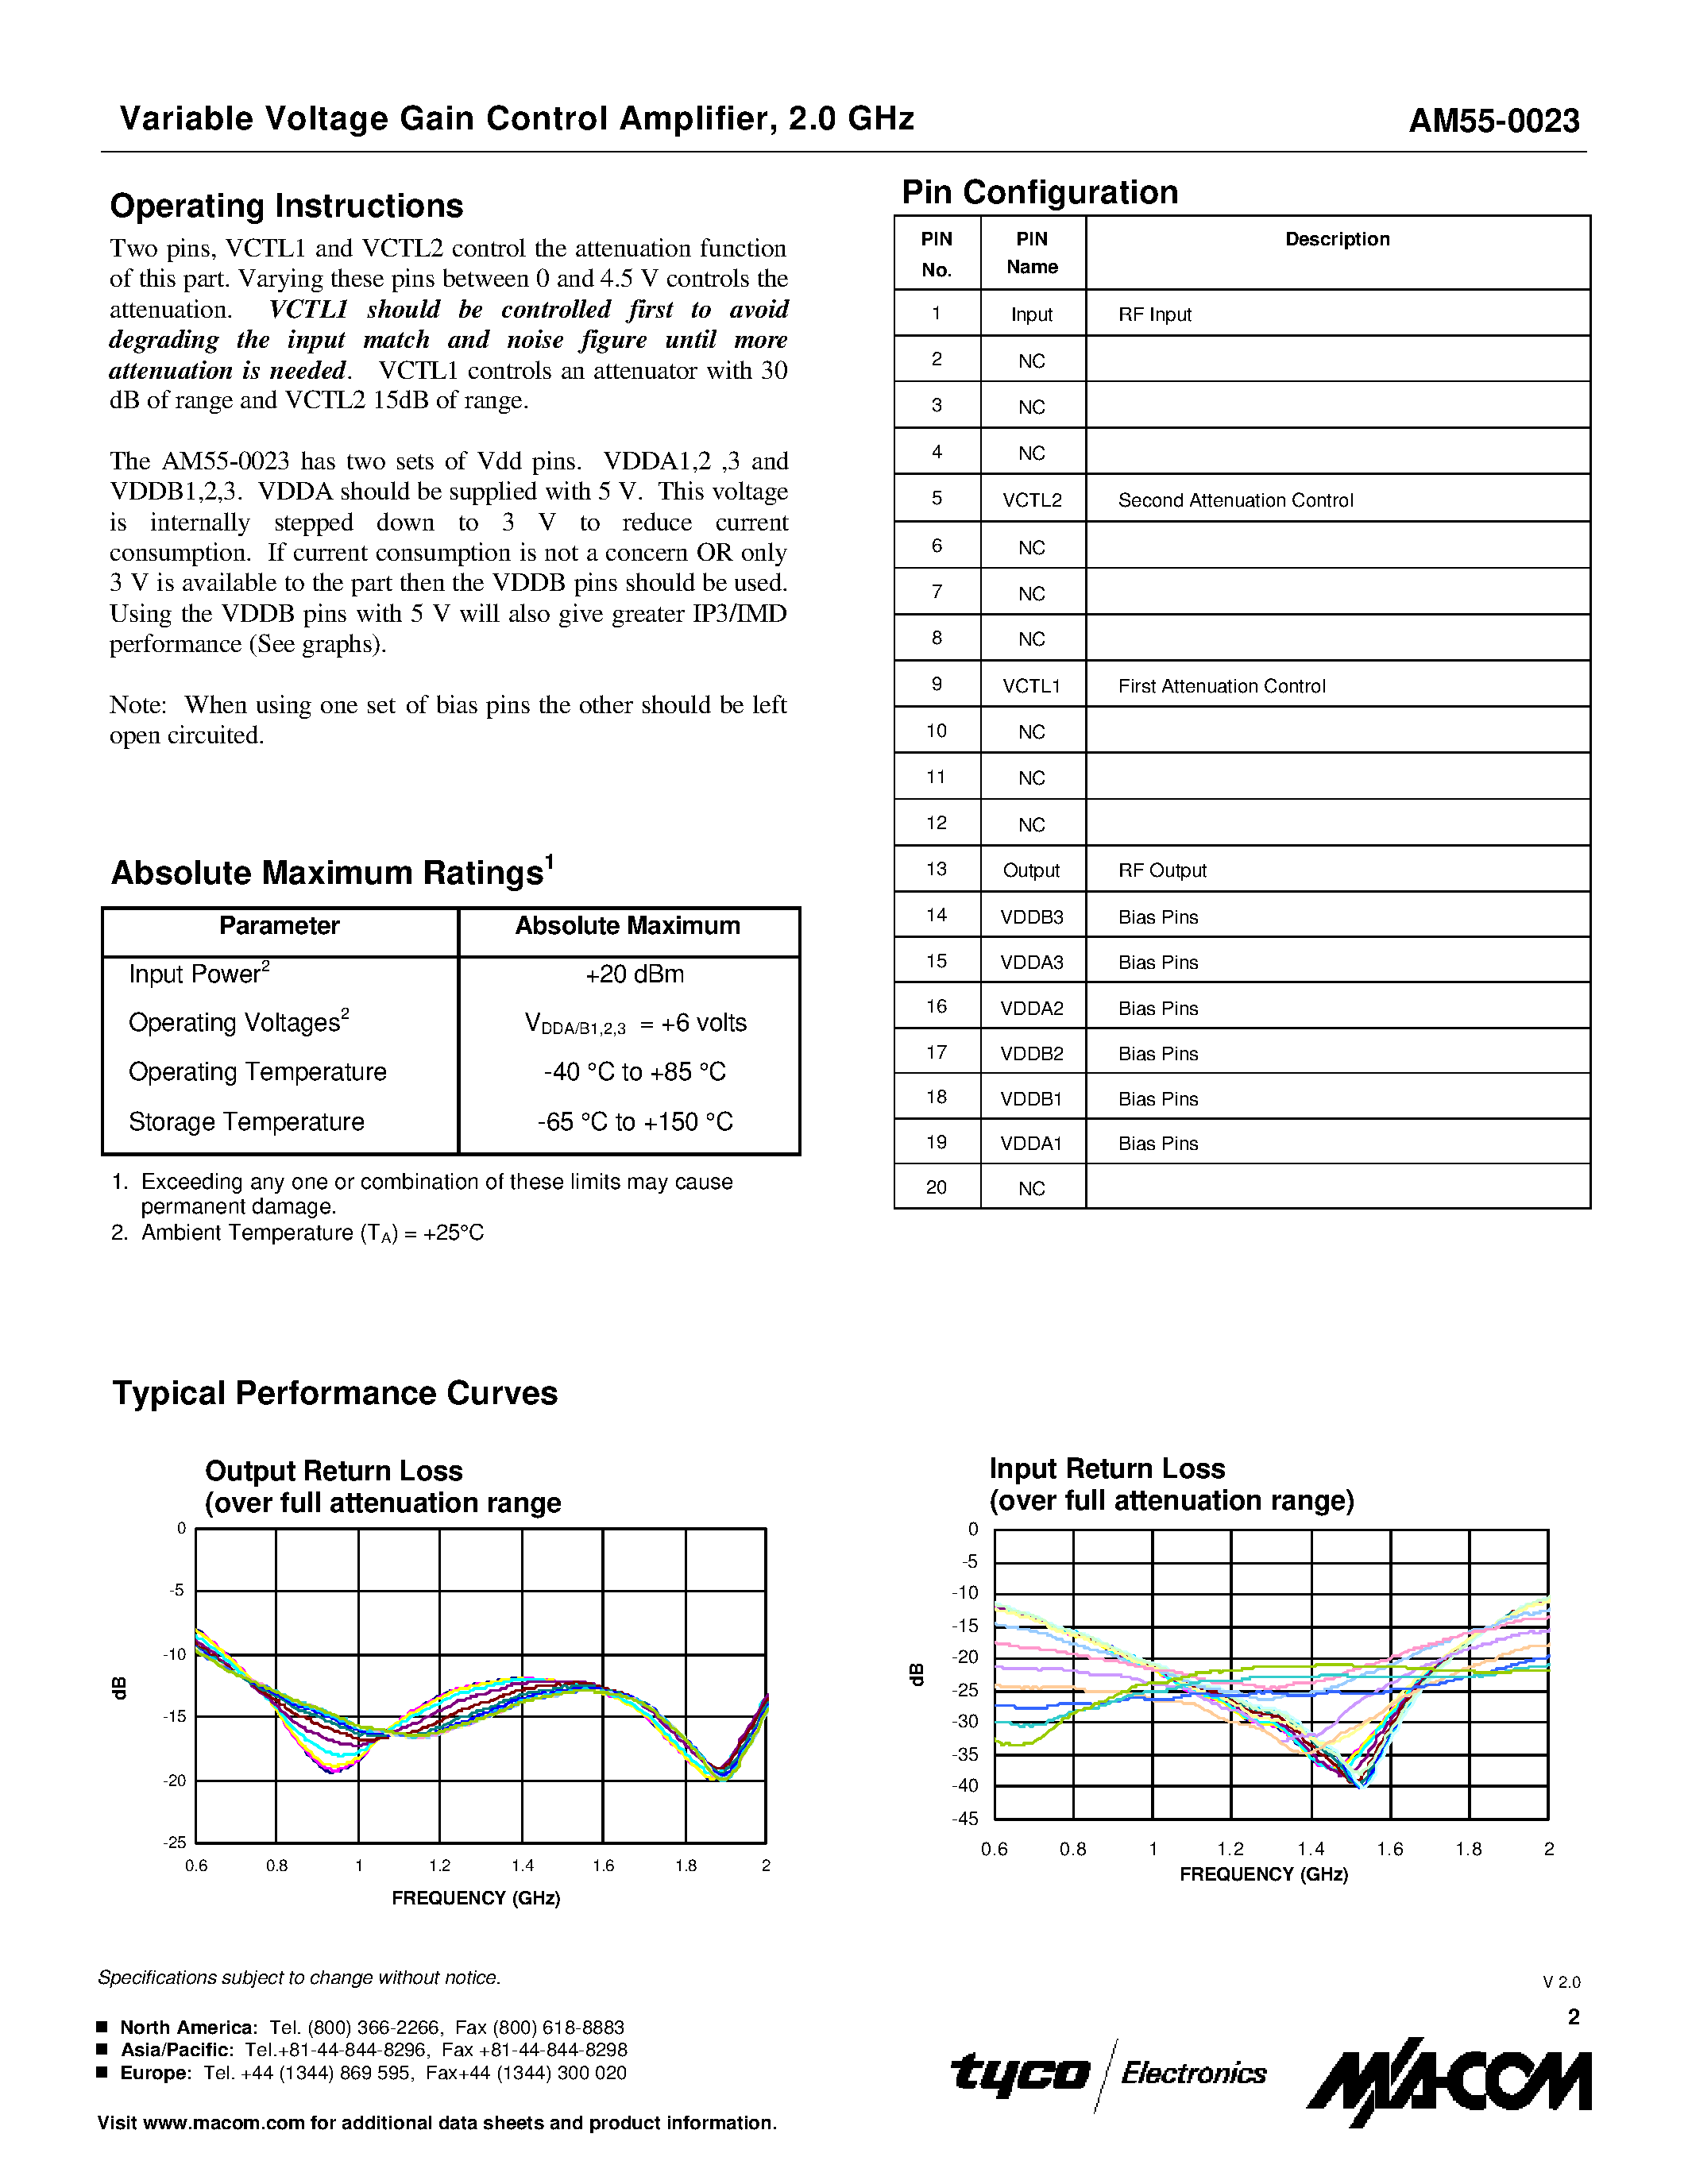 Datasheet AM55-0023 - Variable Voltage Gain Control Amplifier 0.8 - 2.0 GHz page 2